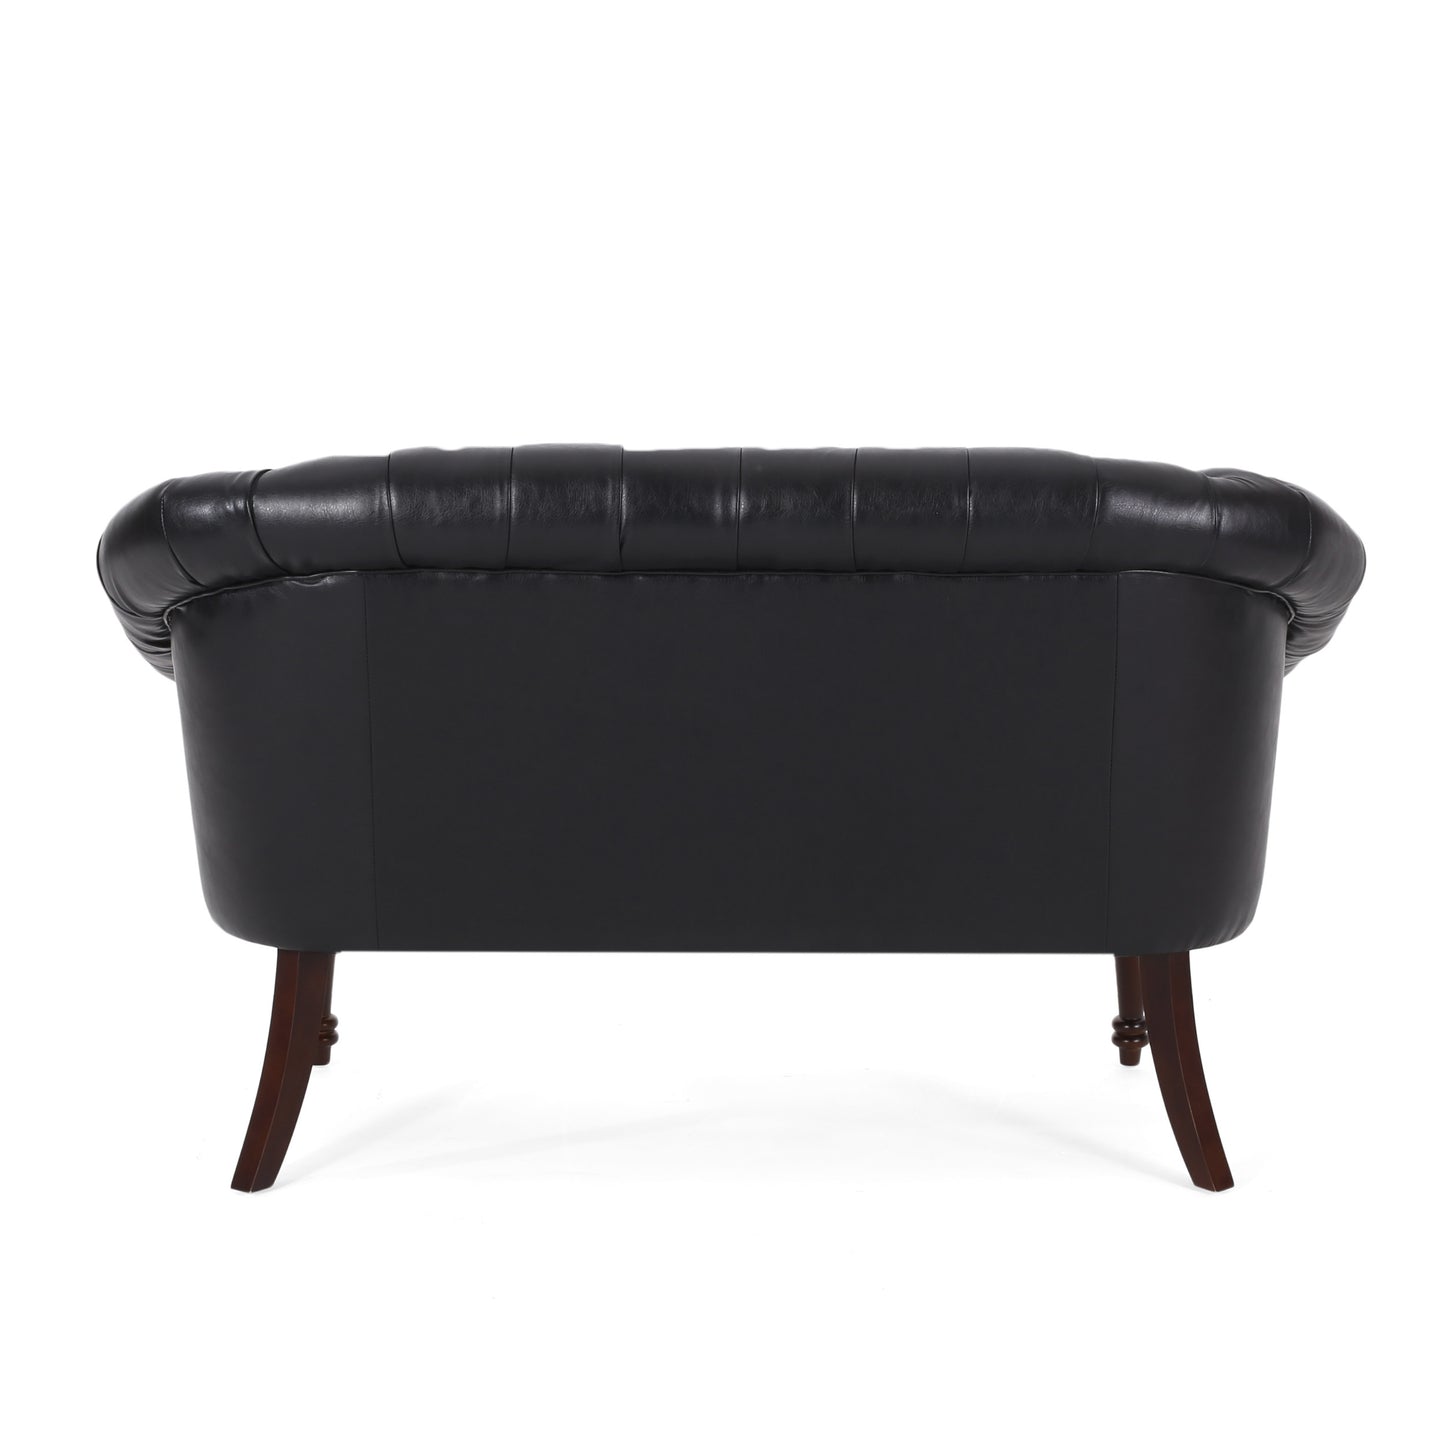 Trask Contemporary Leather Tufted Loveseat with Nailhead Trim